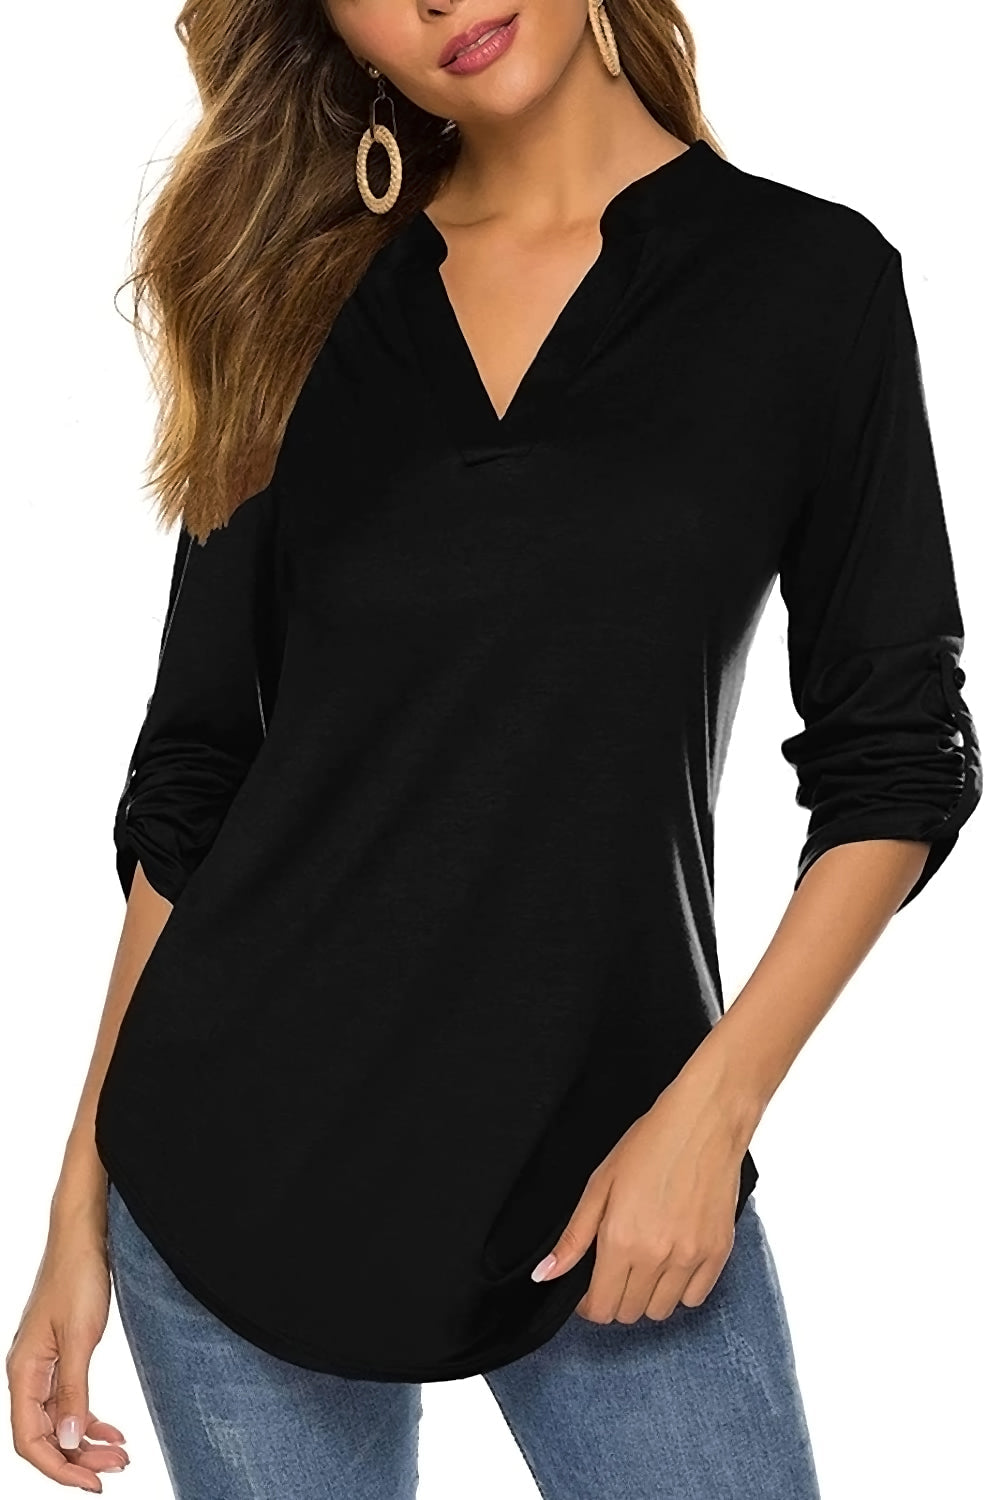 Haute Edition Women's 3/4 Sleeve Tunic Tops S-3X Solid. Plus size avai